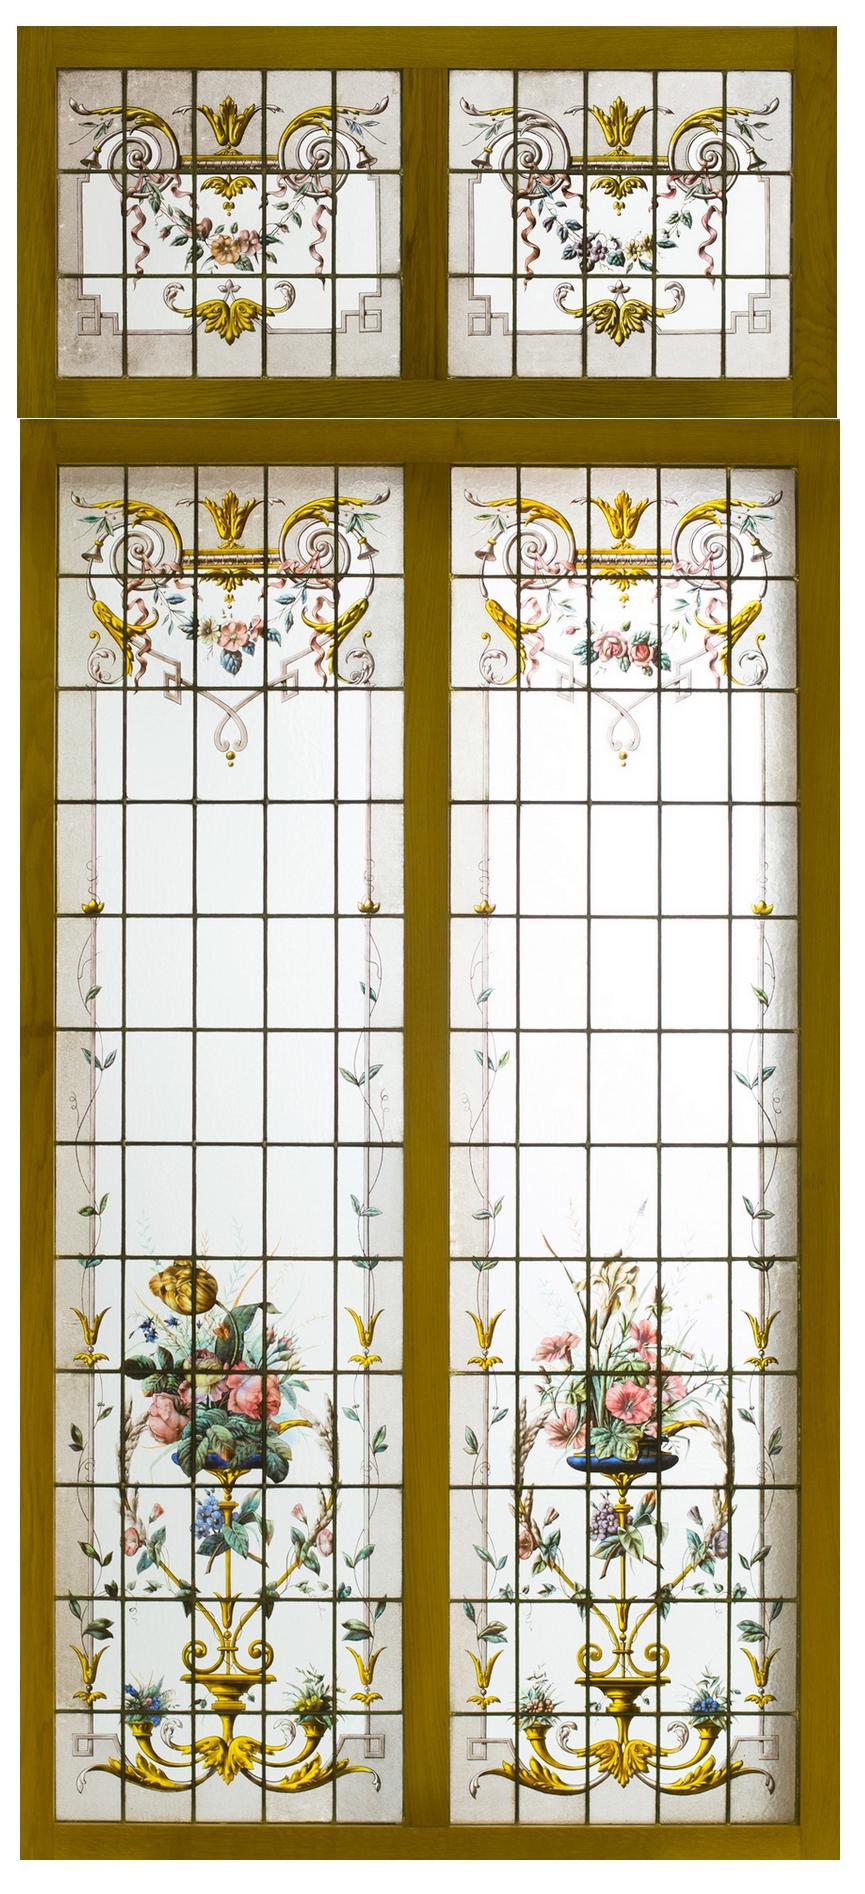 Pair of double stained glass windows and their transoms painted in grey and enamel on translucent glass representing bouquets of flowers framed with friezes of plants and flowers.
French work, circa 1880.

Transom dimensions with frame:
Height 24.41